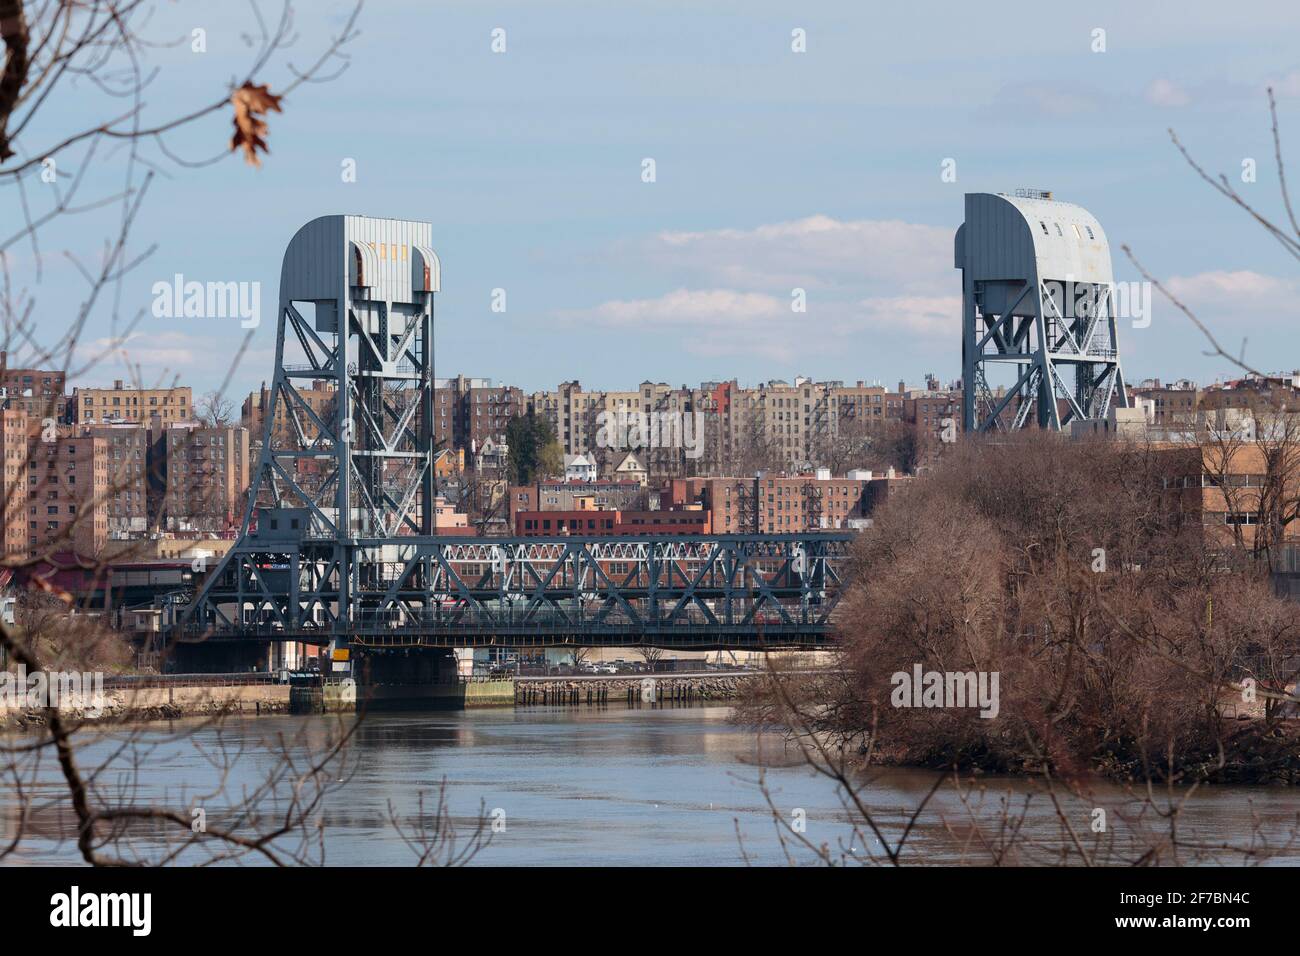 view of the Broadway Bridge, a double deck vertical lift bridge, connecting Inwood in Northern Manhattan to Marble HIll and the Bronx from across the Stock Photo